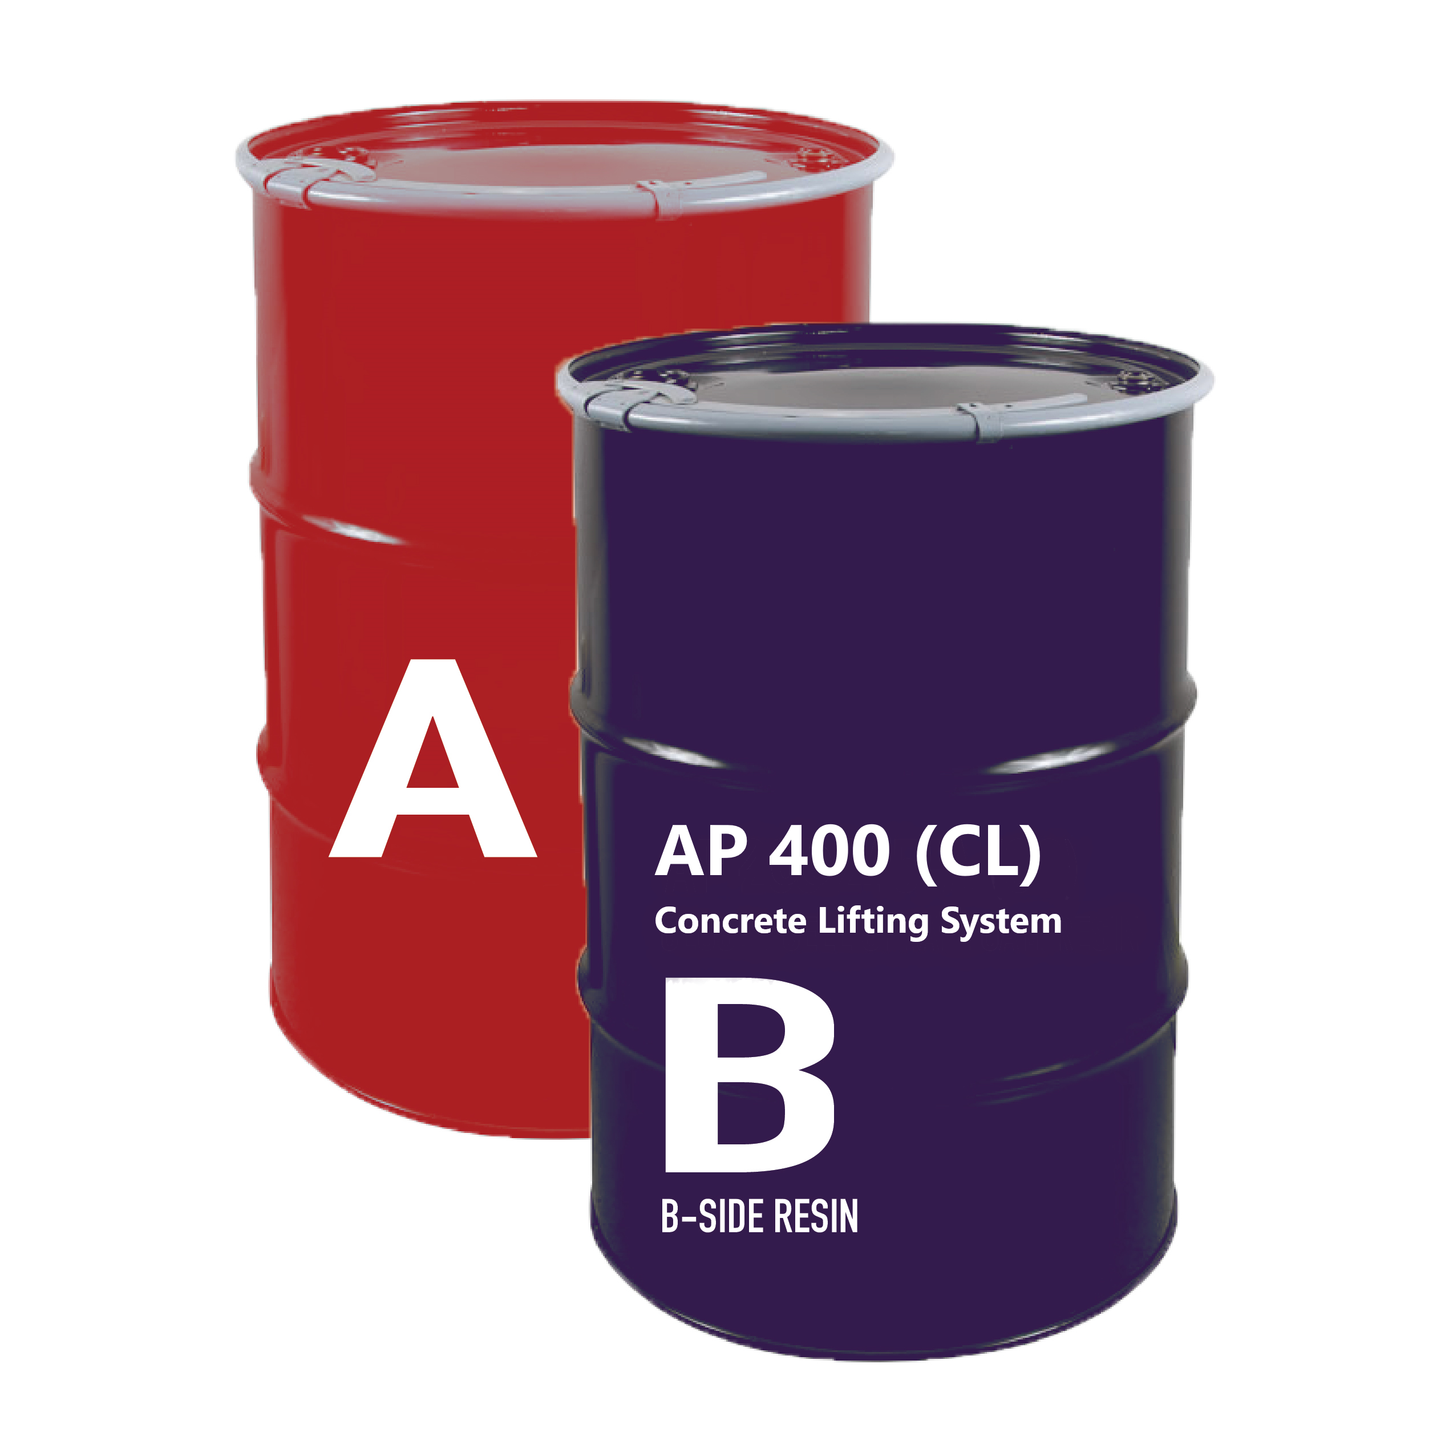 Alpha Polymers Concrete Lifting System AP 400 (CL) Call for Pricing